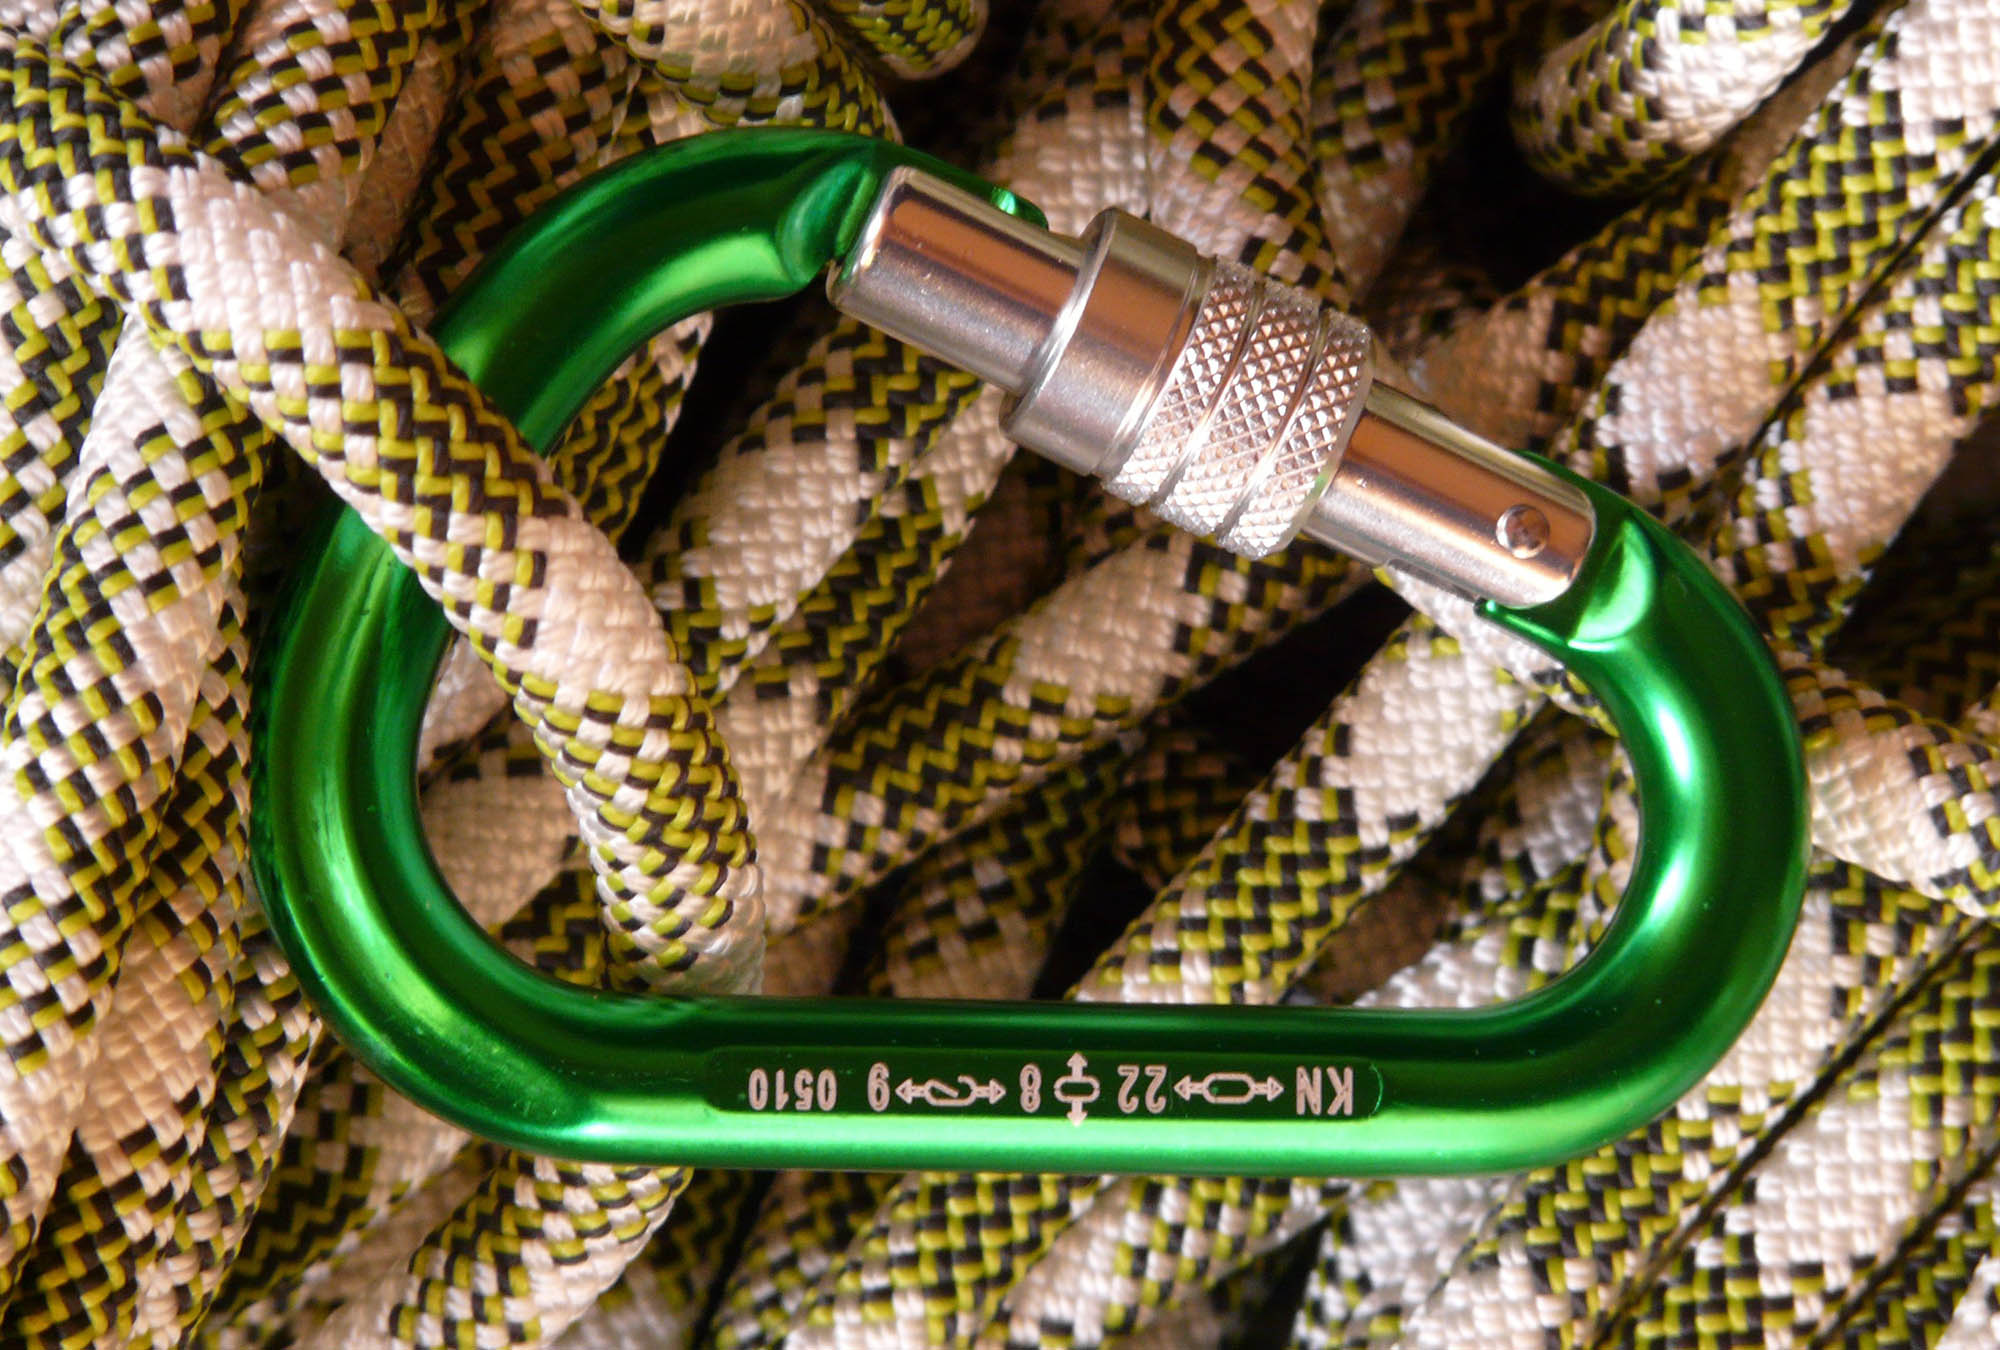 Bring a couple of <a href="https://amzn.to/3KcUHtW" rel="noopener">carabiners</a> to attach your water bottle or other important stuff to a strap on the raft. Everything has to be secured, or it will wind up in the river when you go over a massive rapid.